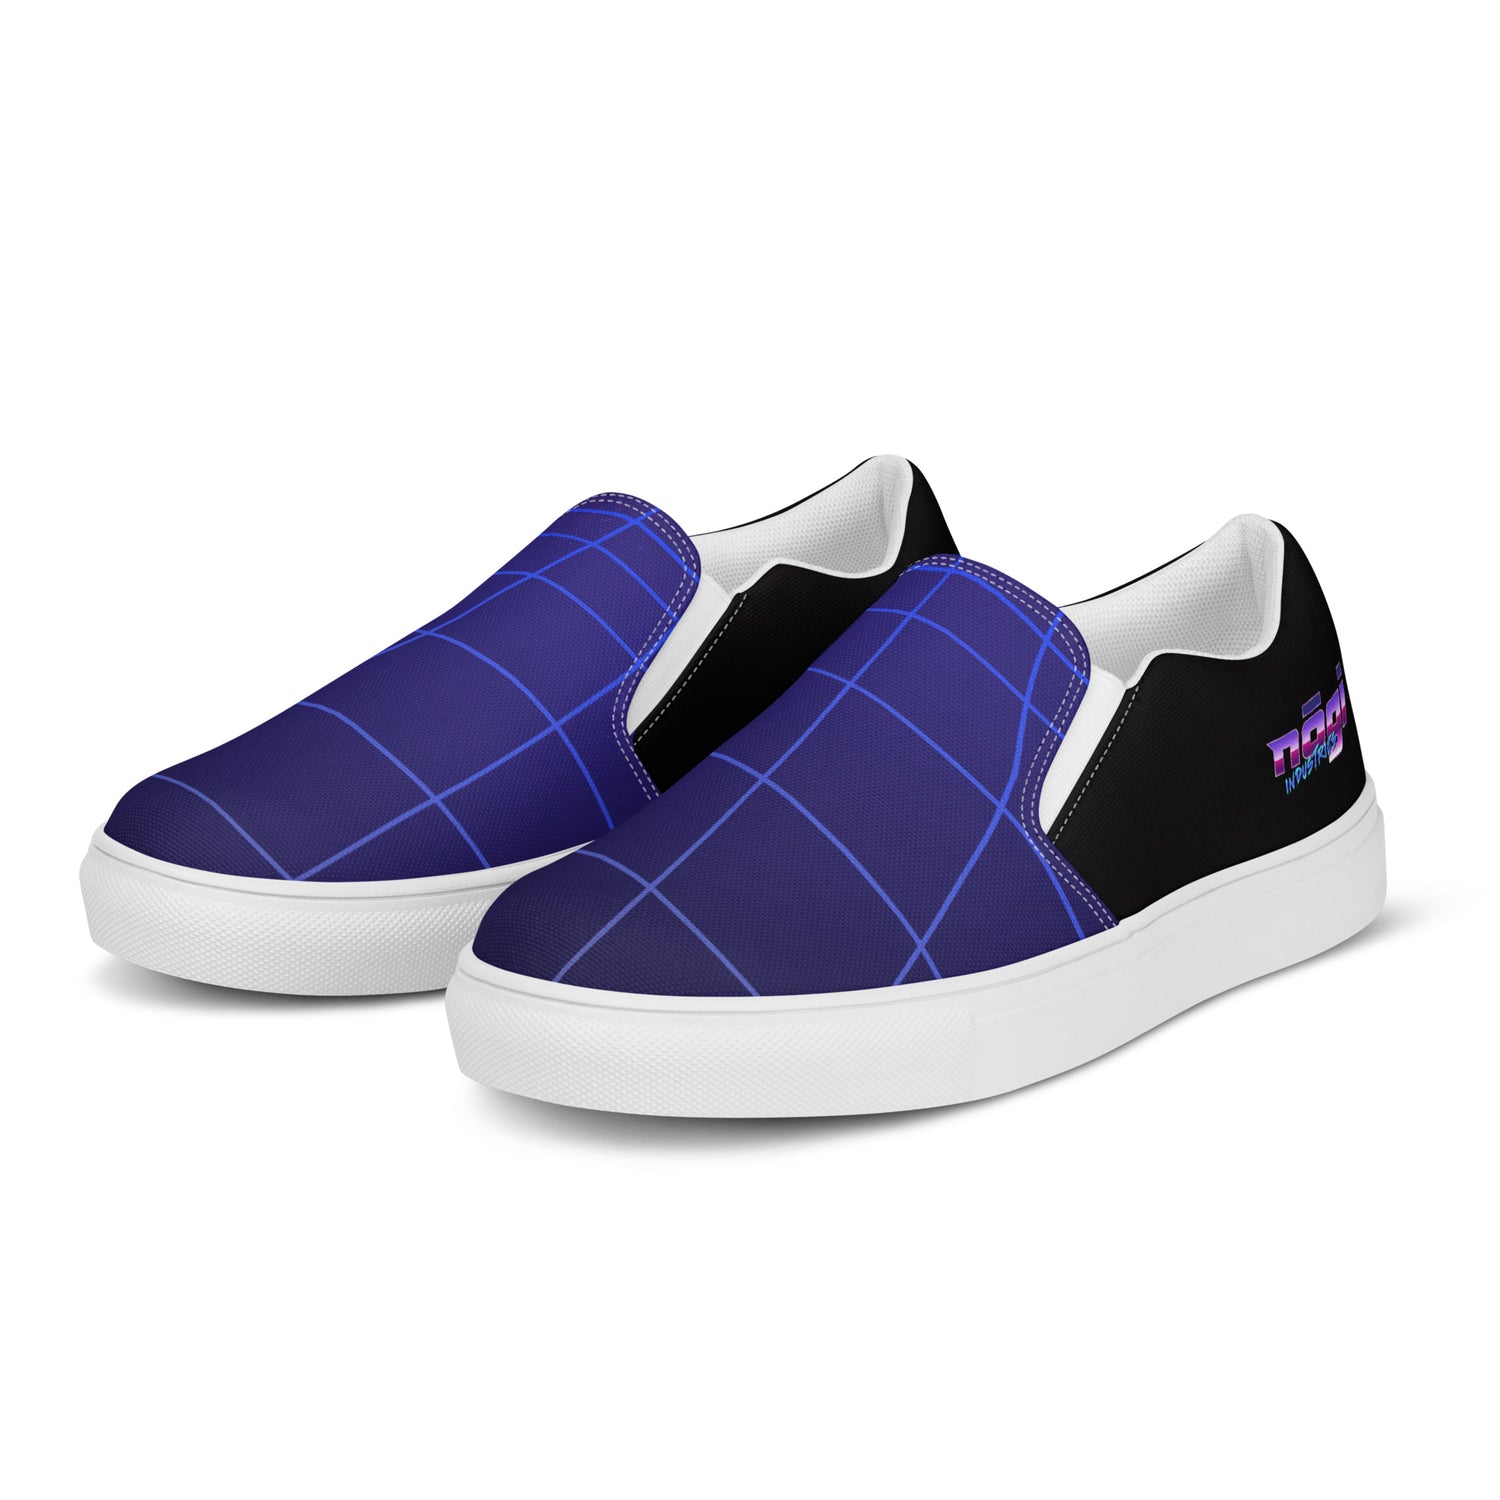 Crystal Vision Men’s Slip-On Canvas Shoes by Nogi Industries